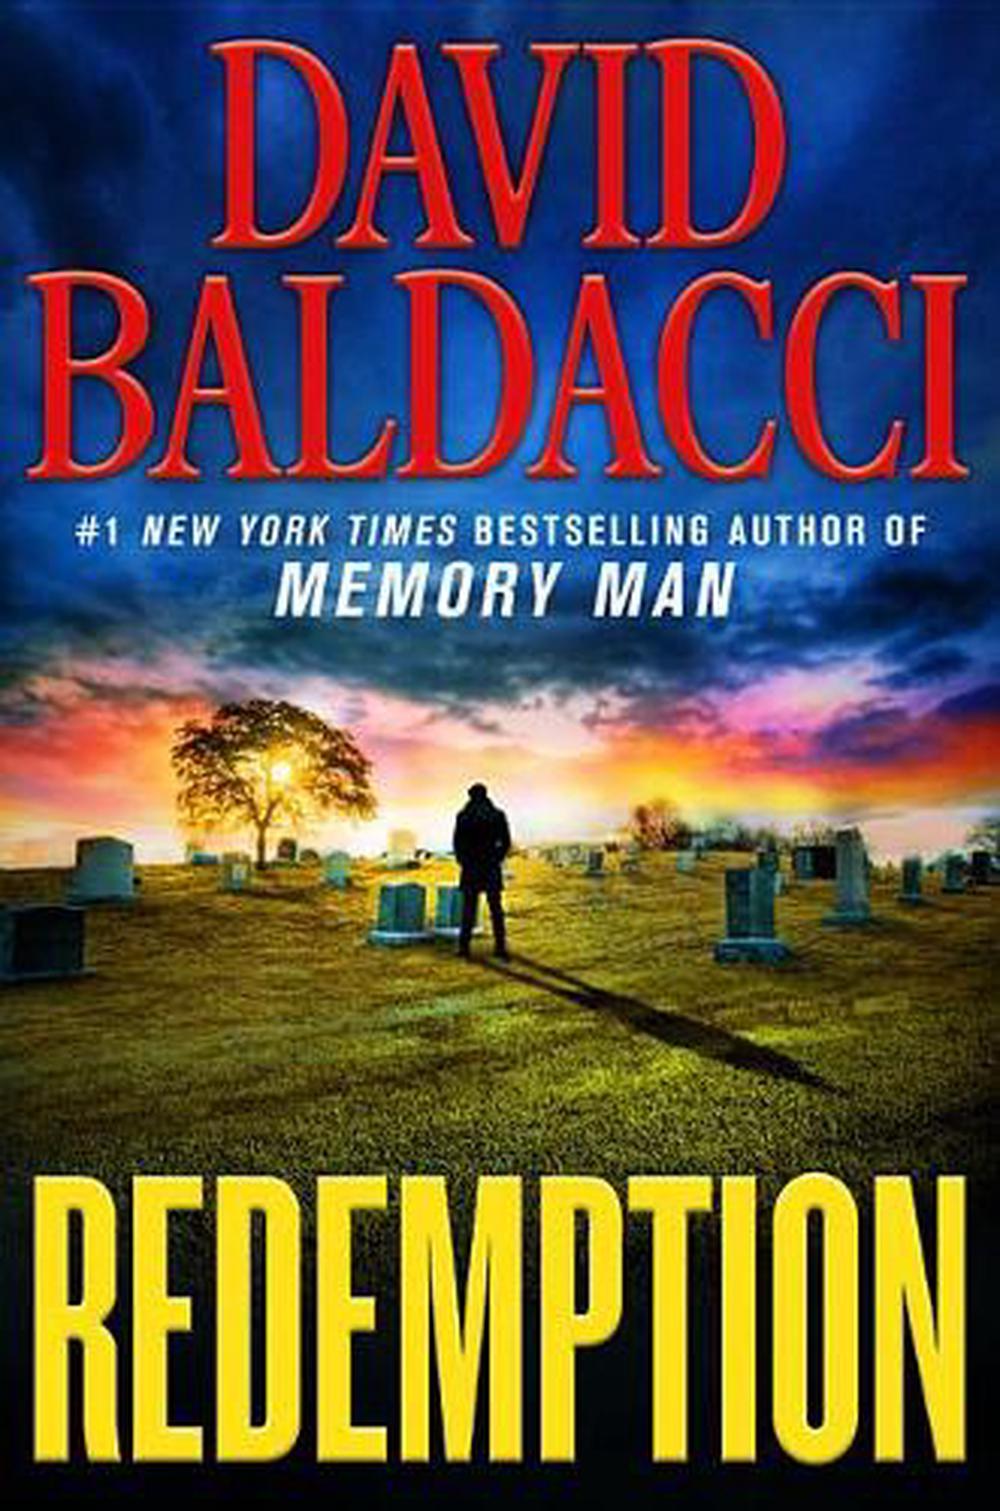 Redemption by David Baldacci (English) Hardcover Book Free Shipping